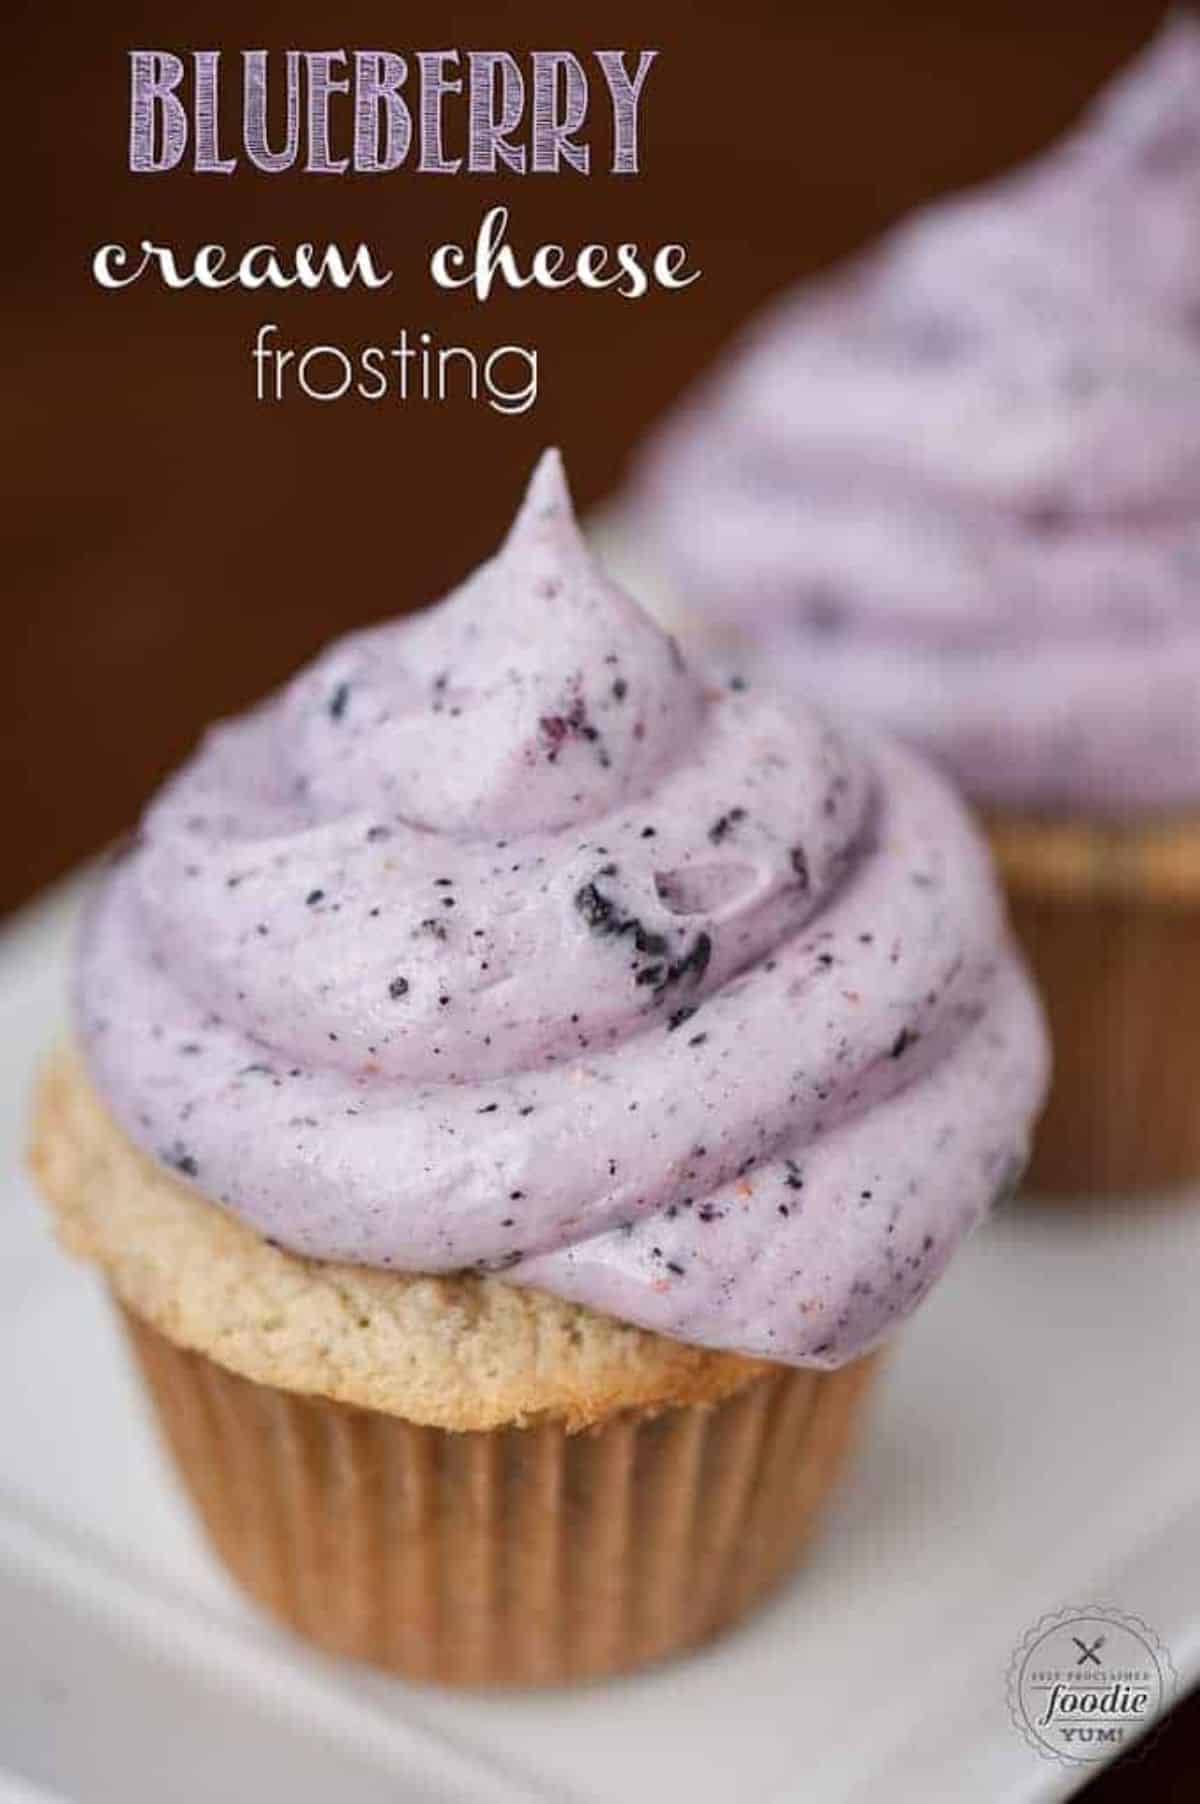 Blueberry Cream Cheese Frosting on a cupcake.